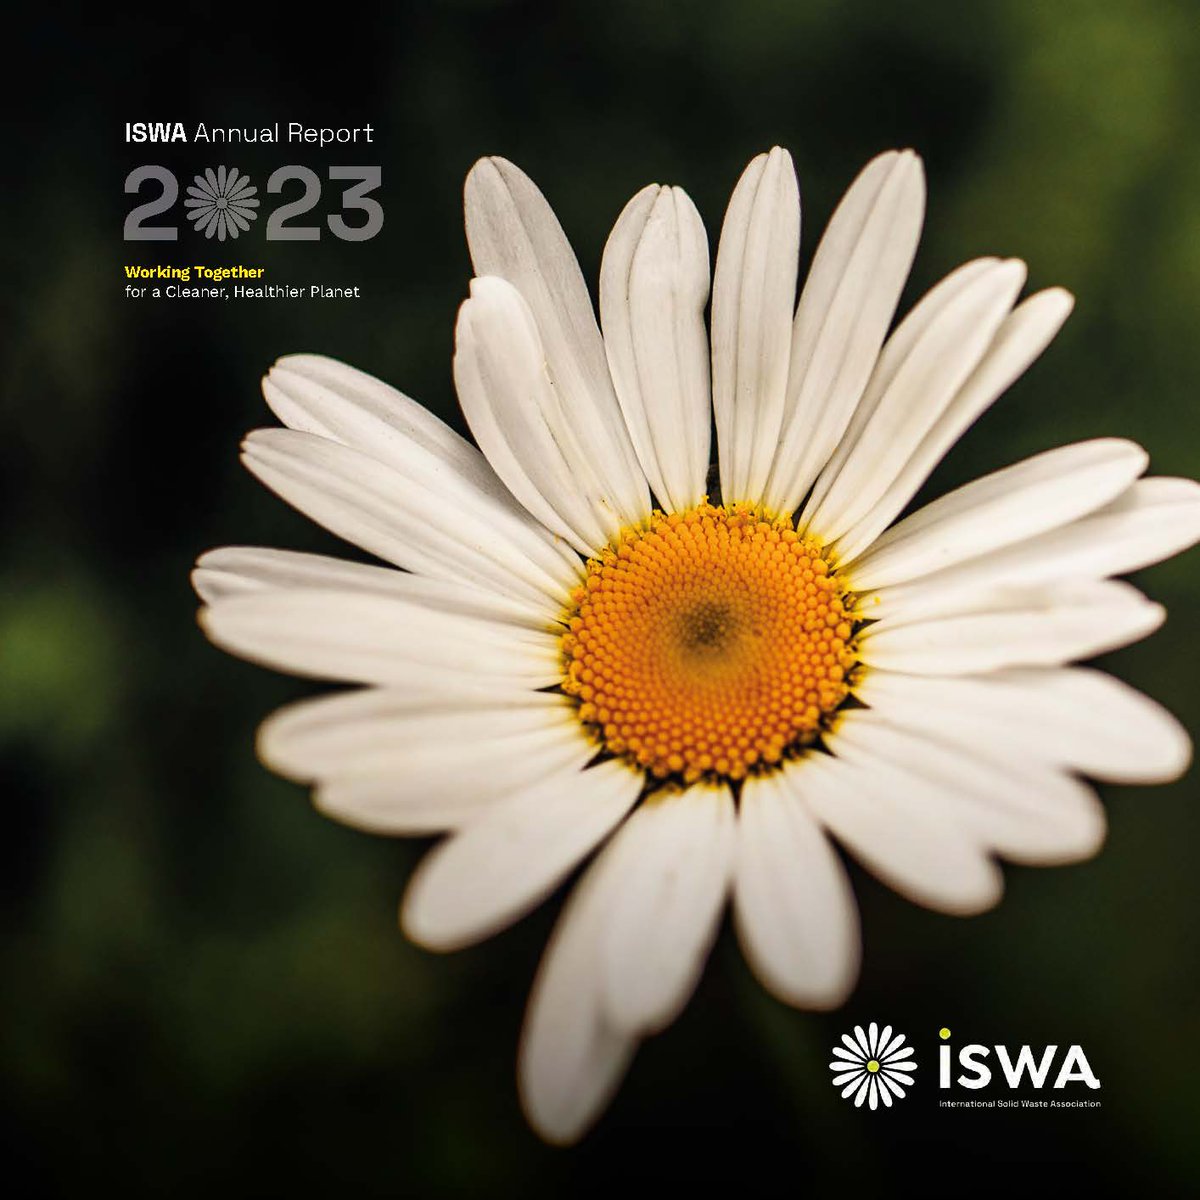 The 2023 ISWA Annual Report is here! A yearly celebration of the ISWA community - the Annual Report represents our dedicated members and their efforts in driving positive change through and on behalf of ISWA. Read along and see if you spot yourself! 🔗 iswa.org/annual-reports